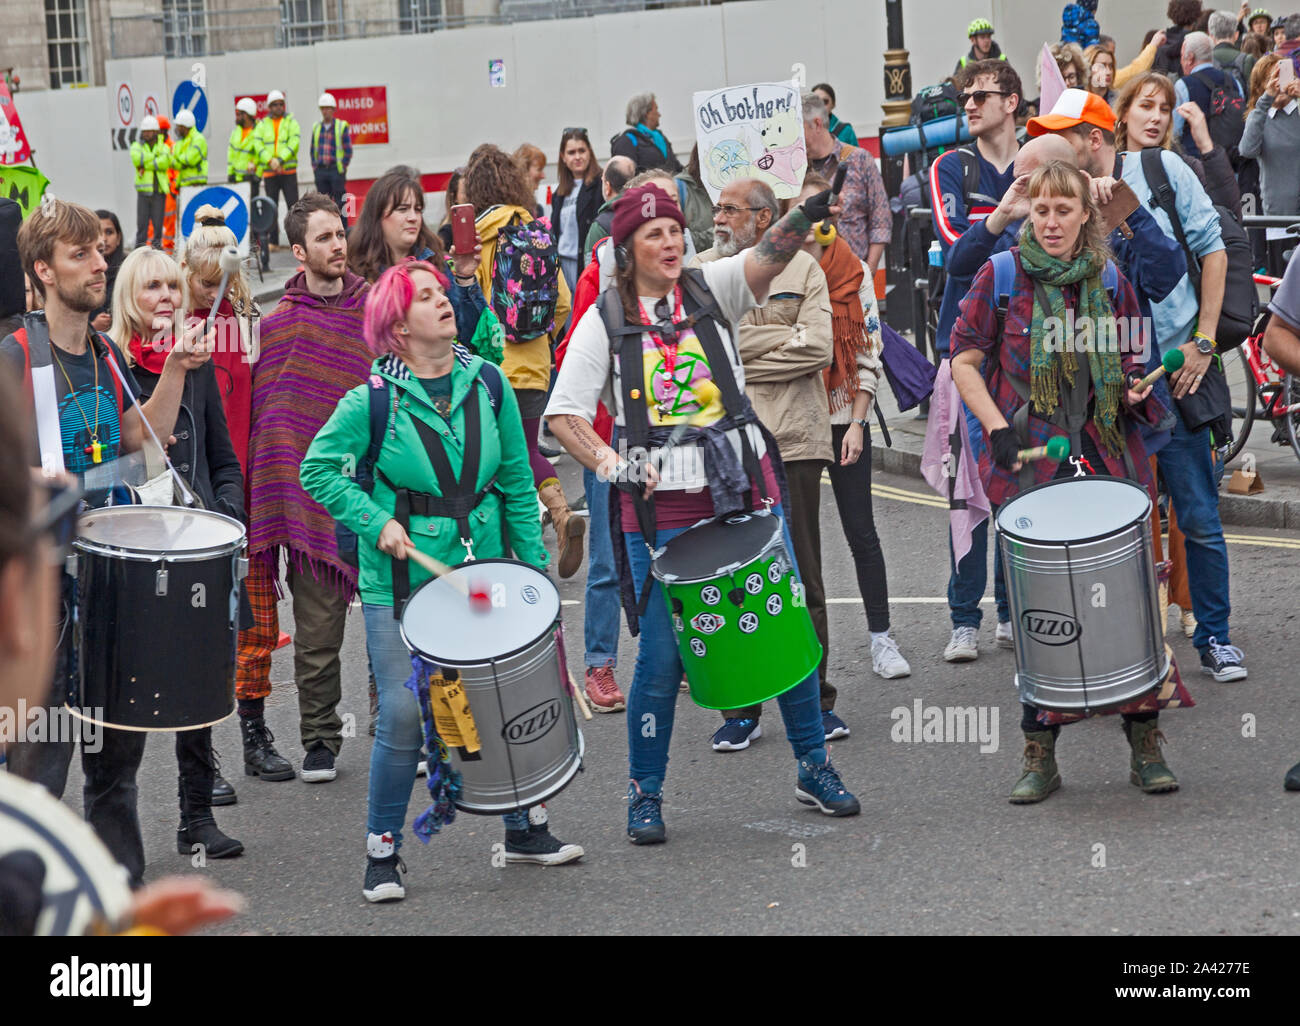 October 8th, 2019. The first day of Extinction Rebellion's occupation of Trafalgar Square.  Drummers beating out the Extinction Rebellion message. Stock Photo